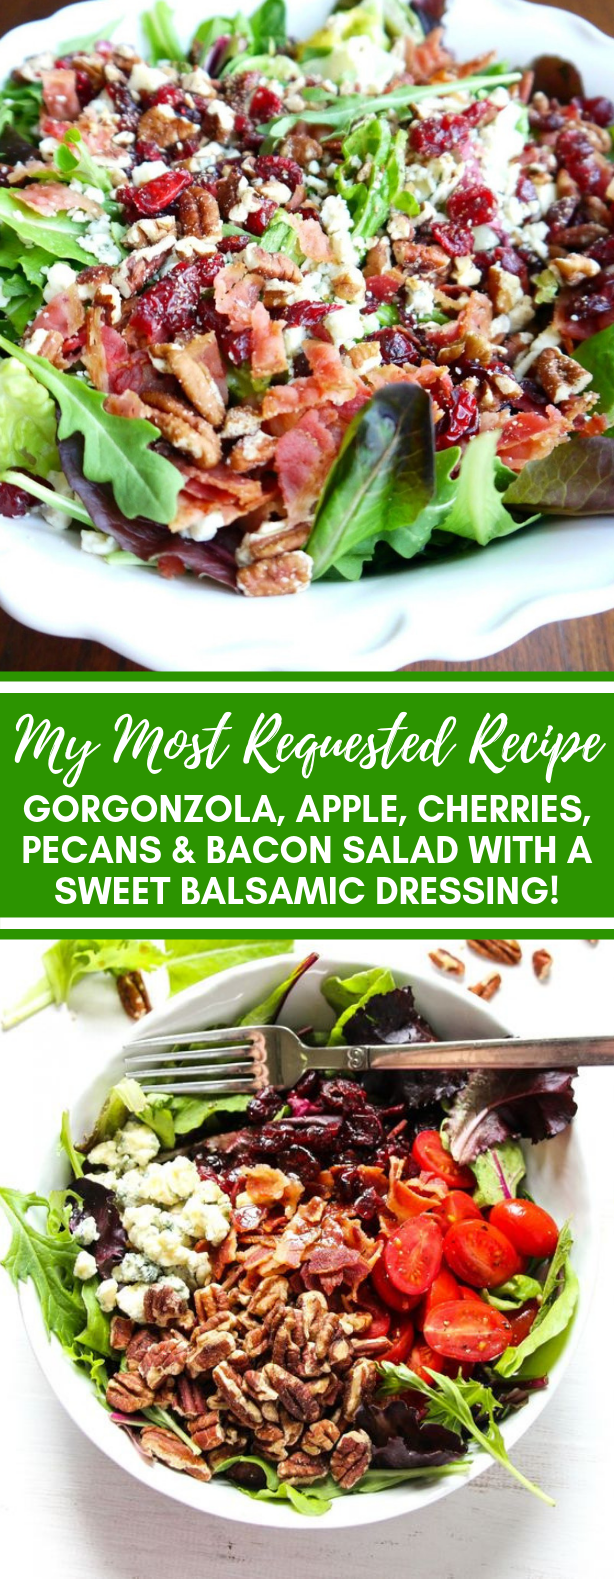 MY MOST REQUESTED RECIPE ~ GORGONZOLA, APPLE, CHERRIES, PECANS & BACON SALAD WITH A SWEET BALSAMIC DRESSING! #vegetarian #vegetable